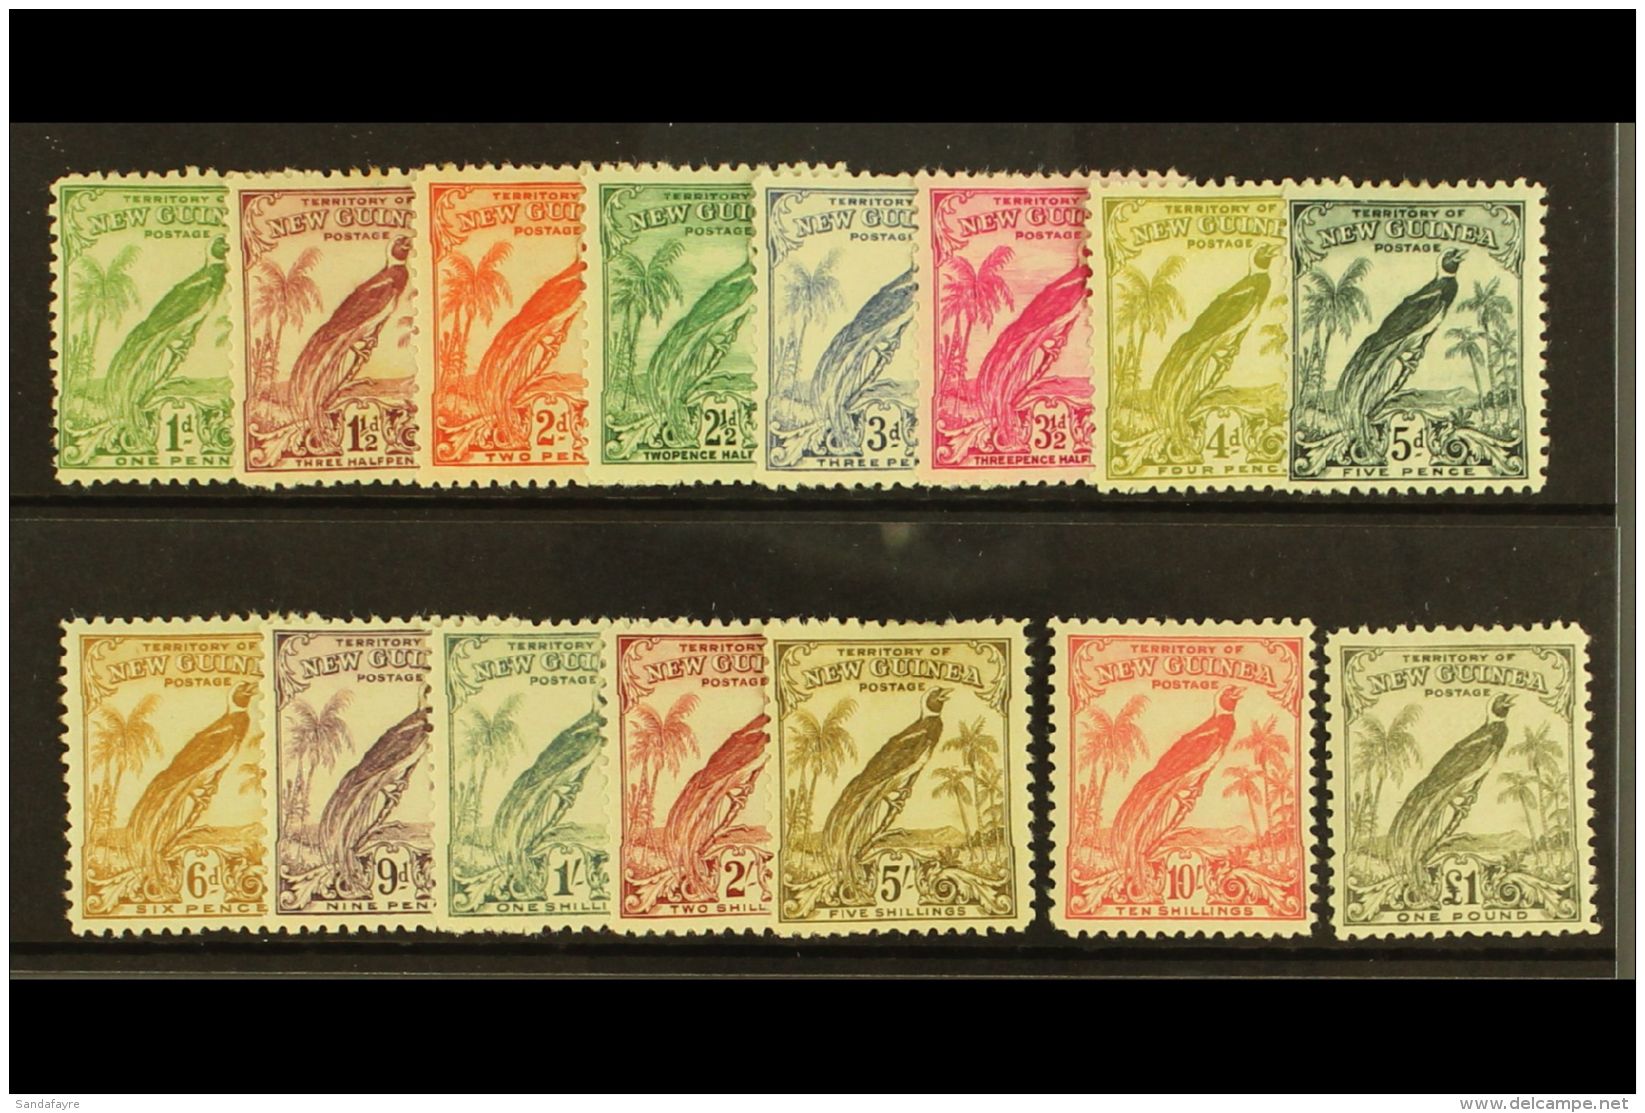 1932 10th Anniv Set (without Dates),  SG 177/89, Very Fine And Fresh Mint. (15 Stamps) For More Images, Please... - Papoea-Nieuw-Guinea